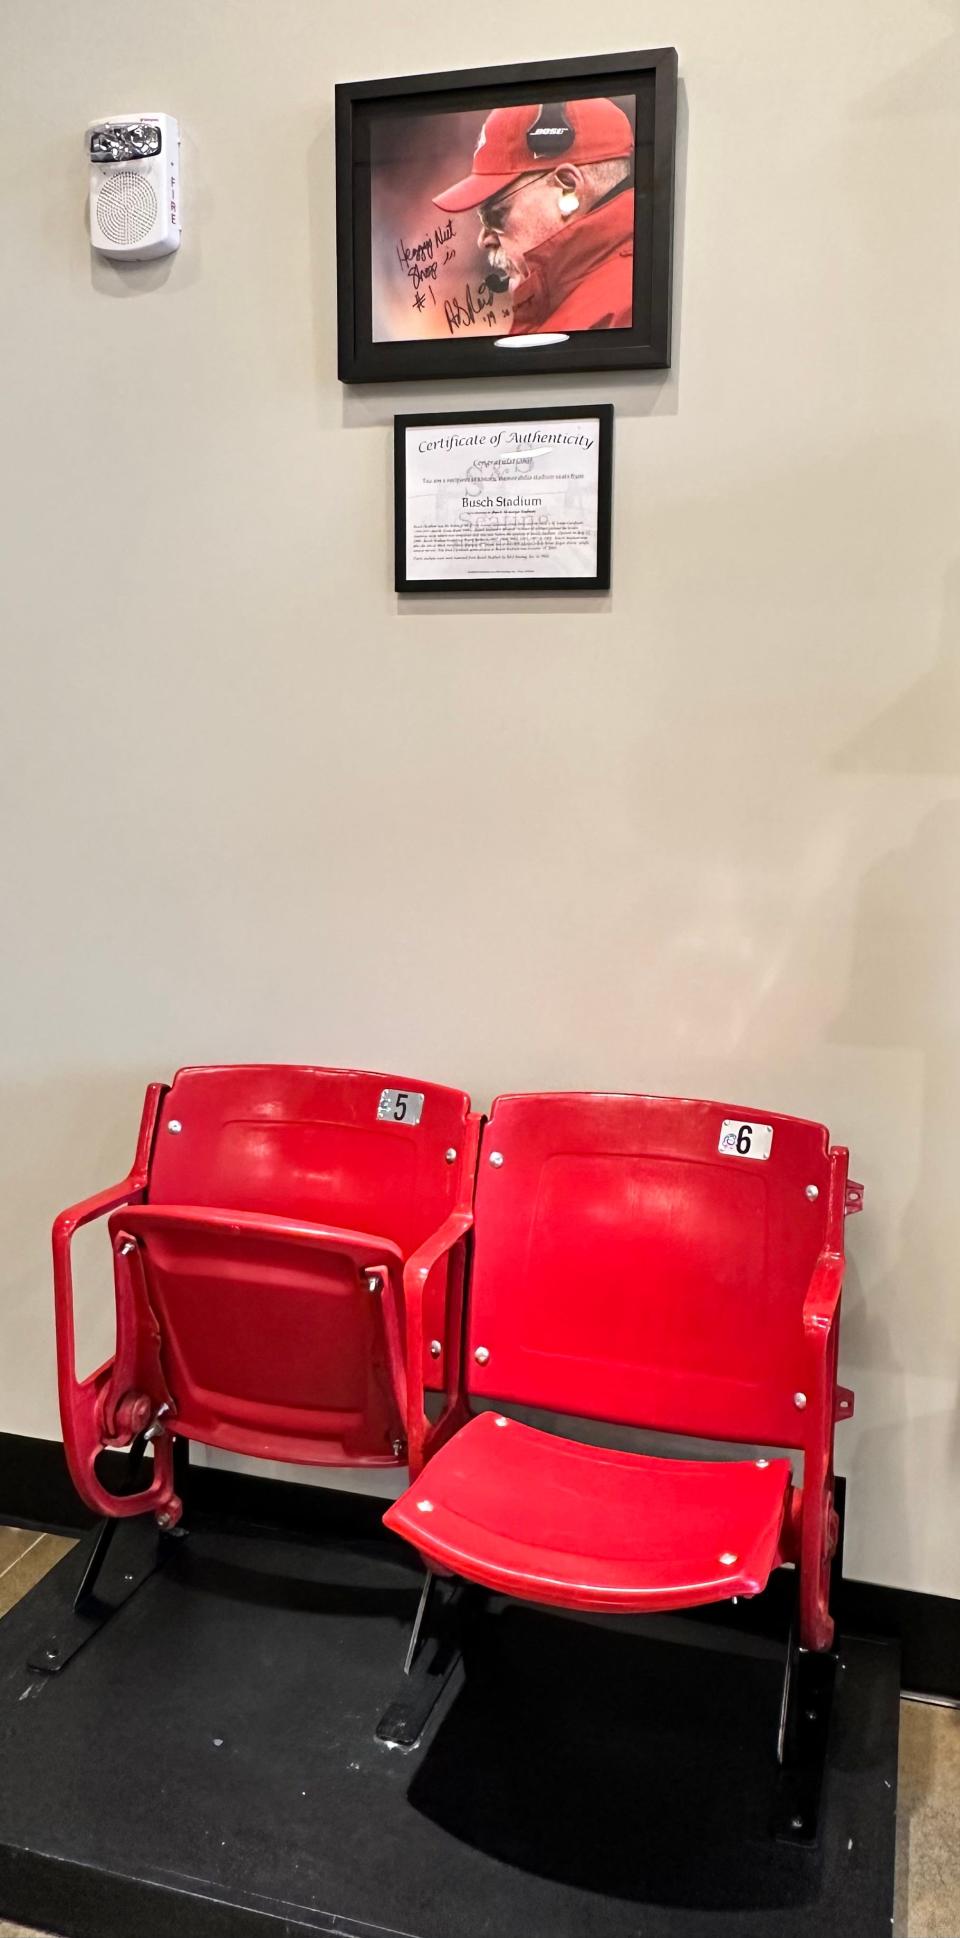 An autographed photo of Andy Reid, head coach of the Kansas City Chiefs, hangs above two stadium seats at the new Heggy's Nut Shop in the Hall of Fame Village.